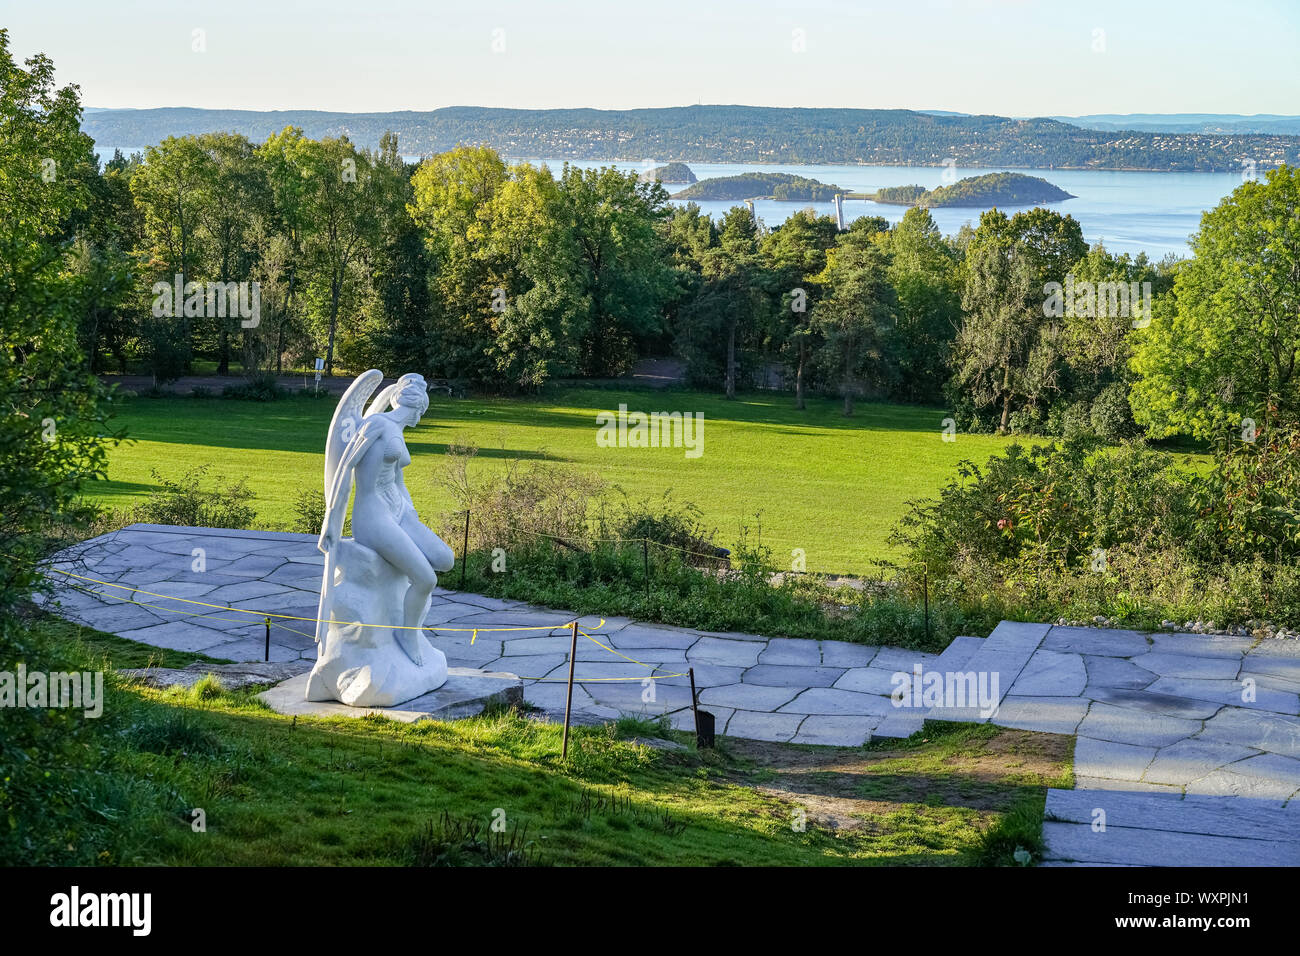 Ekebergparken Sculpture Park with sea view and sculpture 'Anatomy of an angel' by the artist Damien Hirst in the fall in Oslo, Norway. Stock Photo